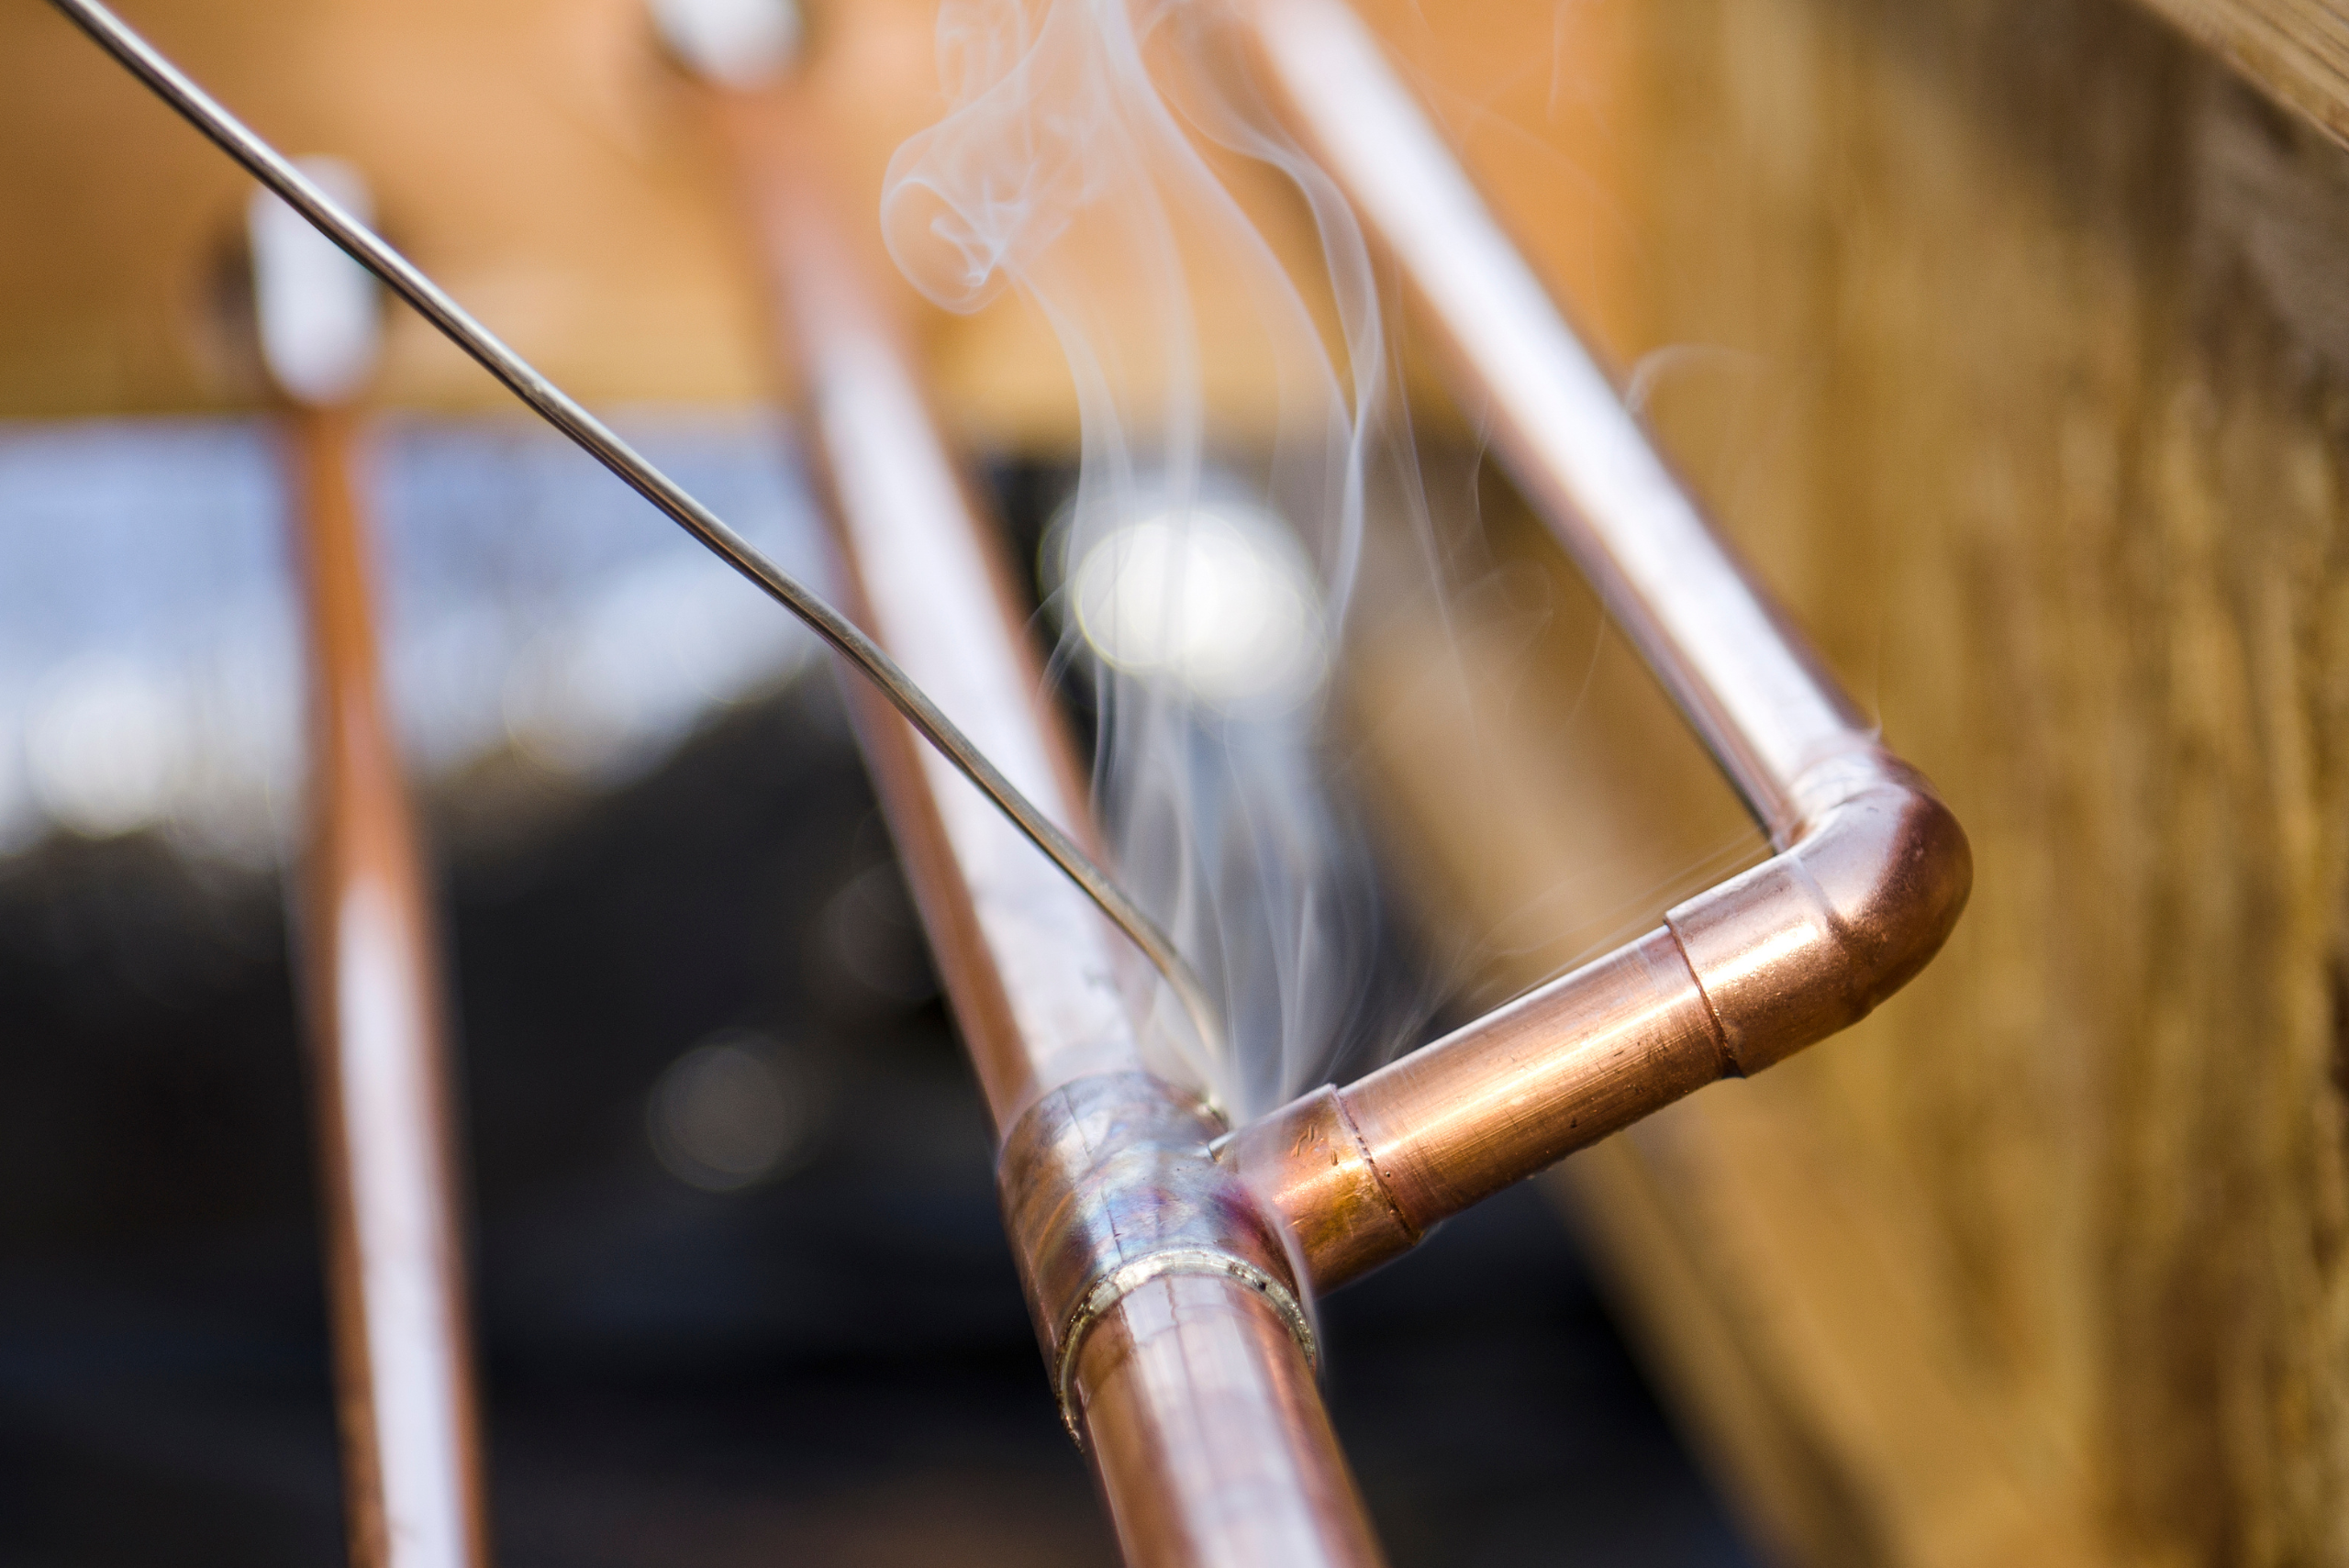 A copper pipe steaming while being soldiered.